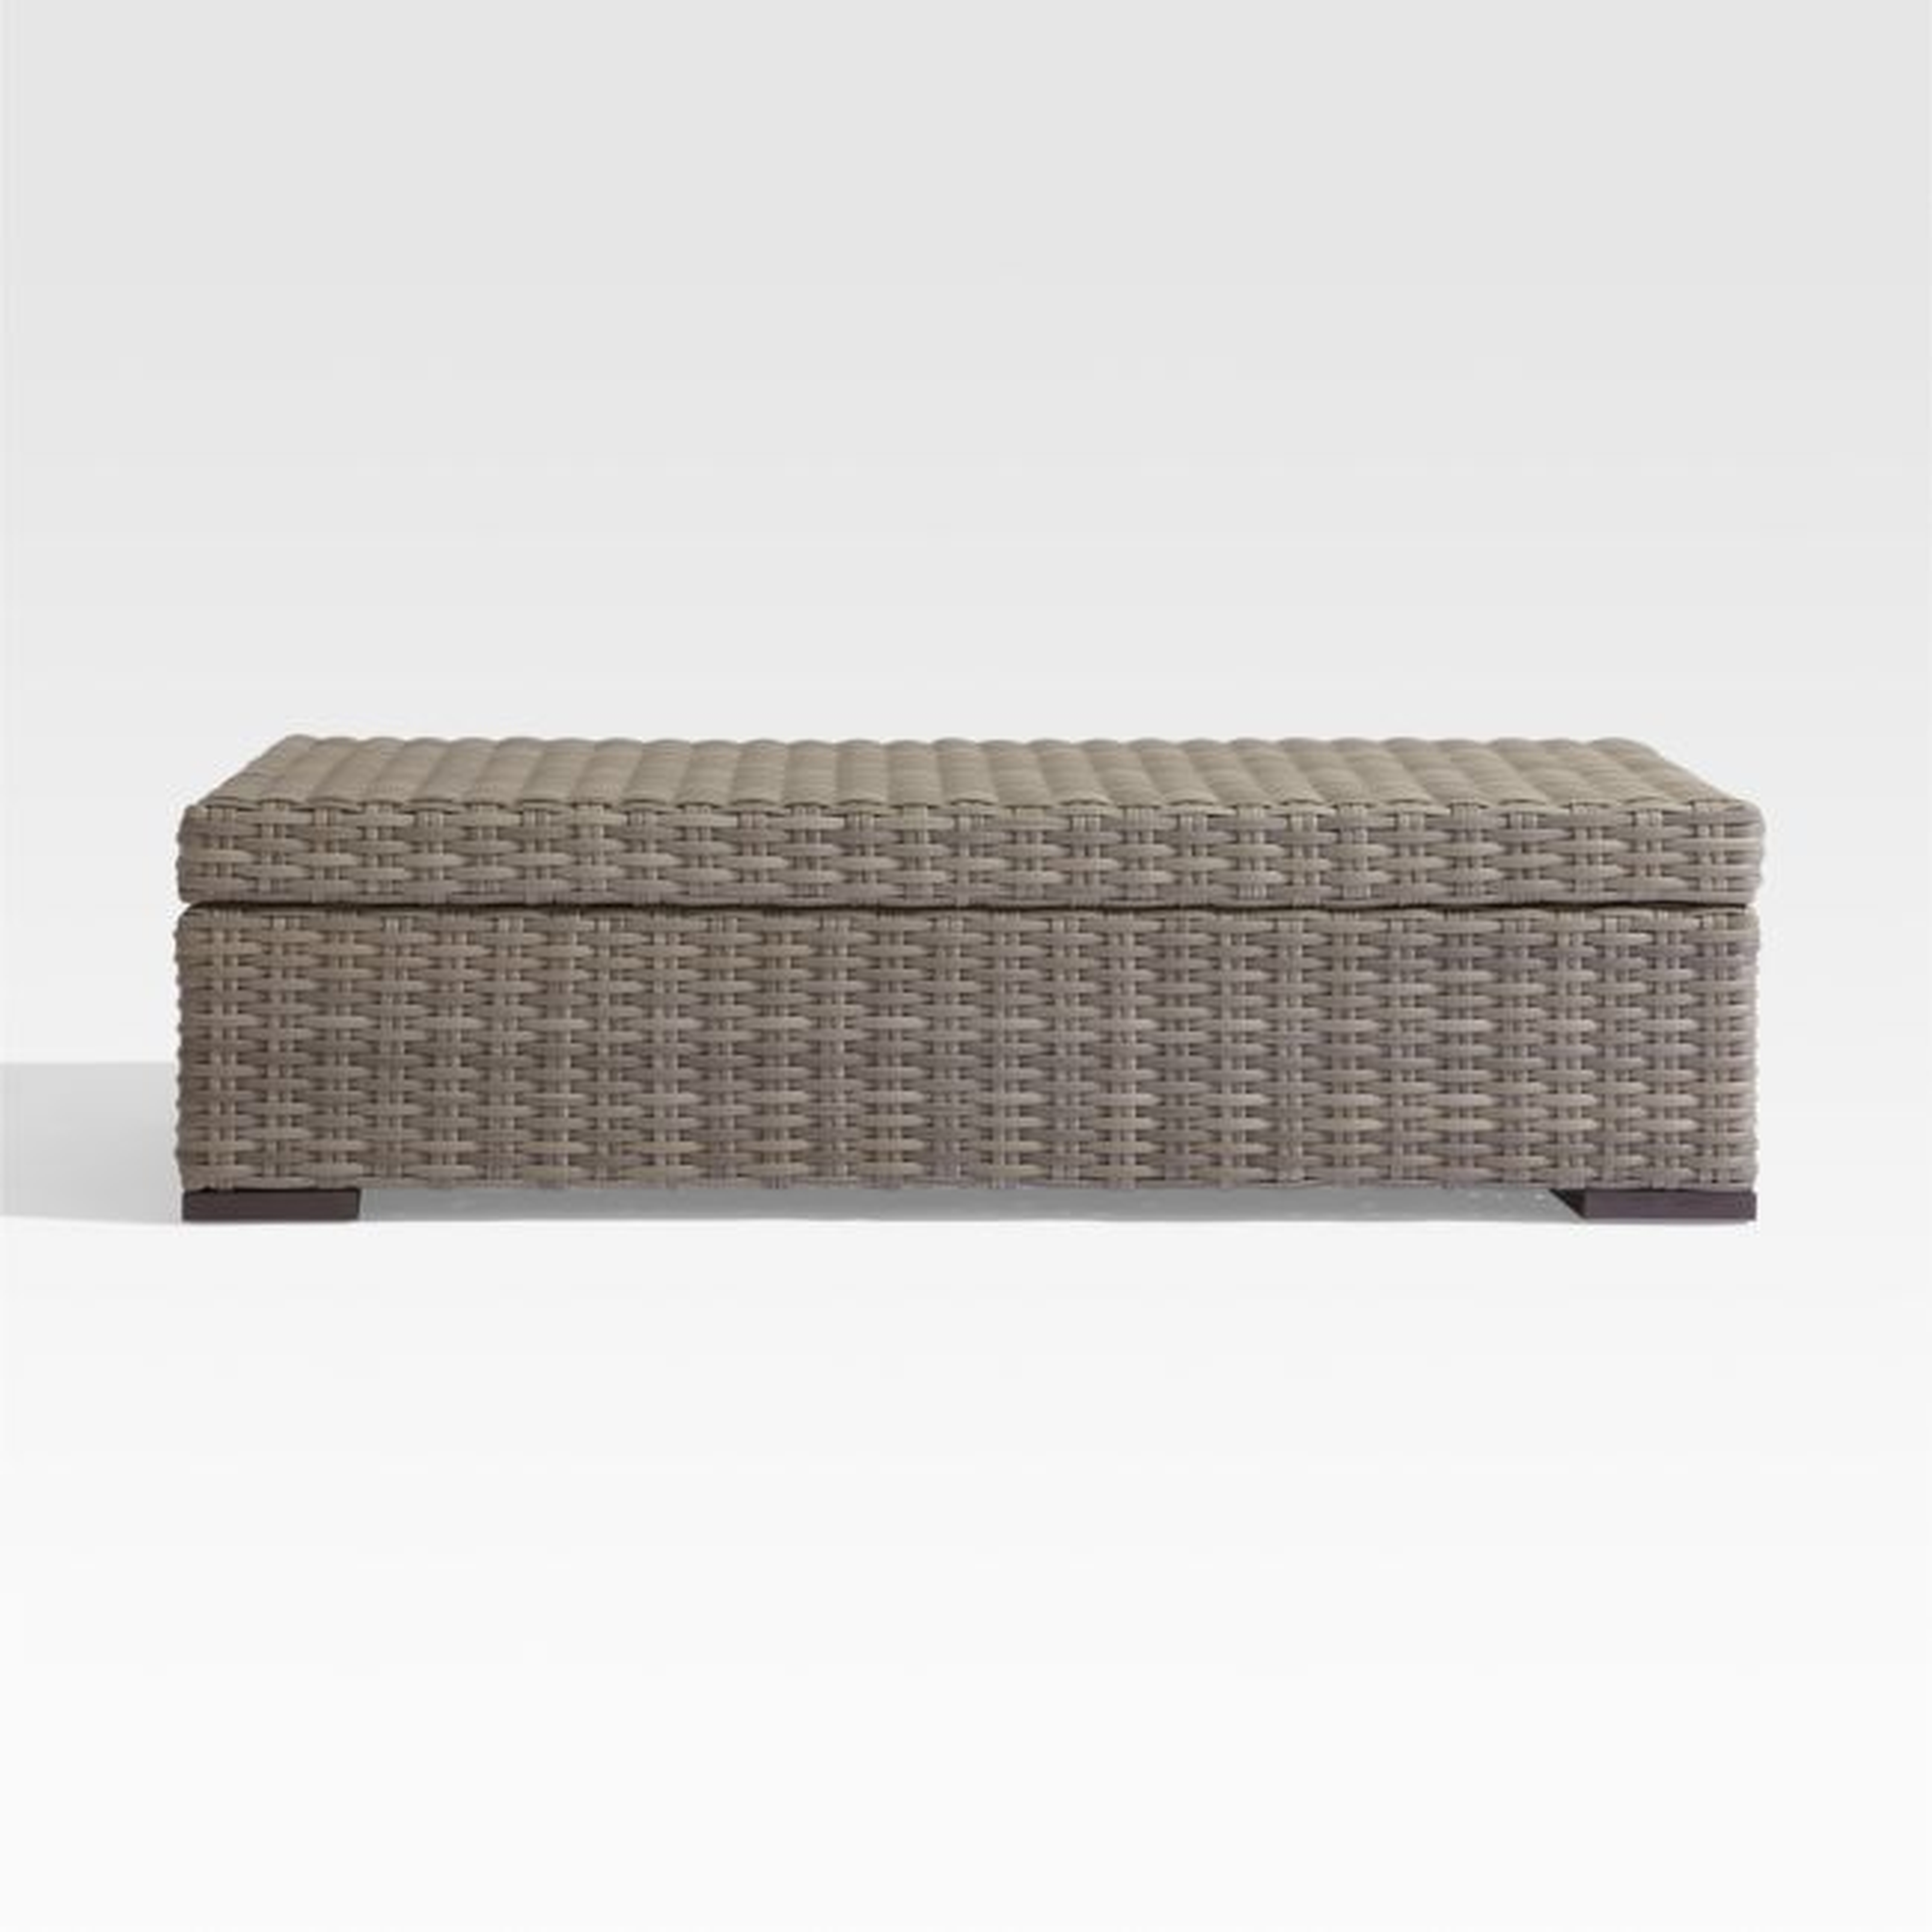 Abaco Resin Wicker Outdoor Storage Chest - Crate and Barrel